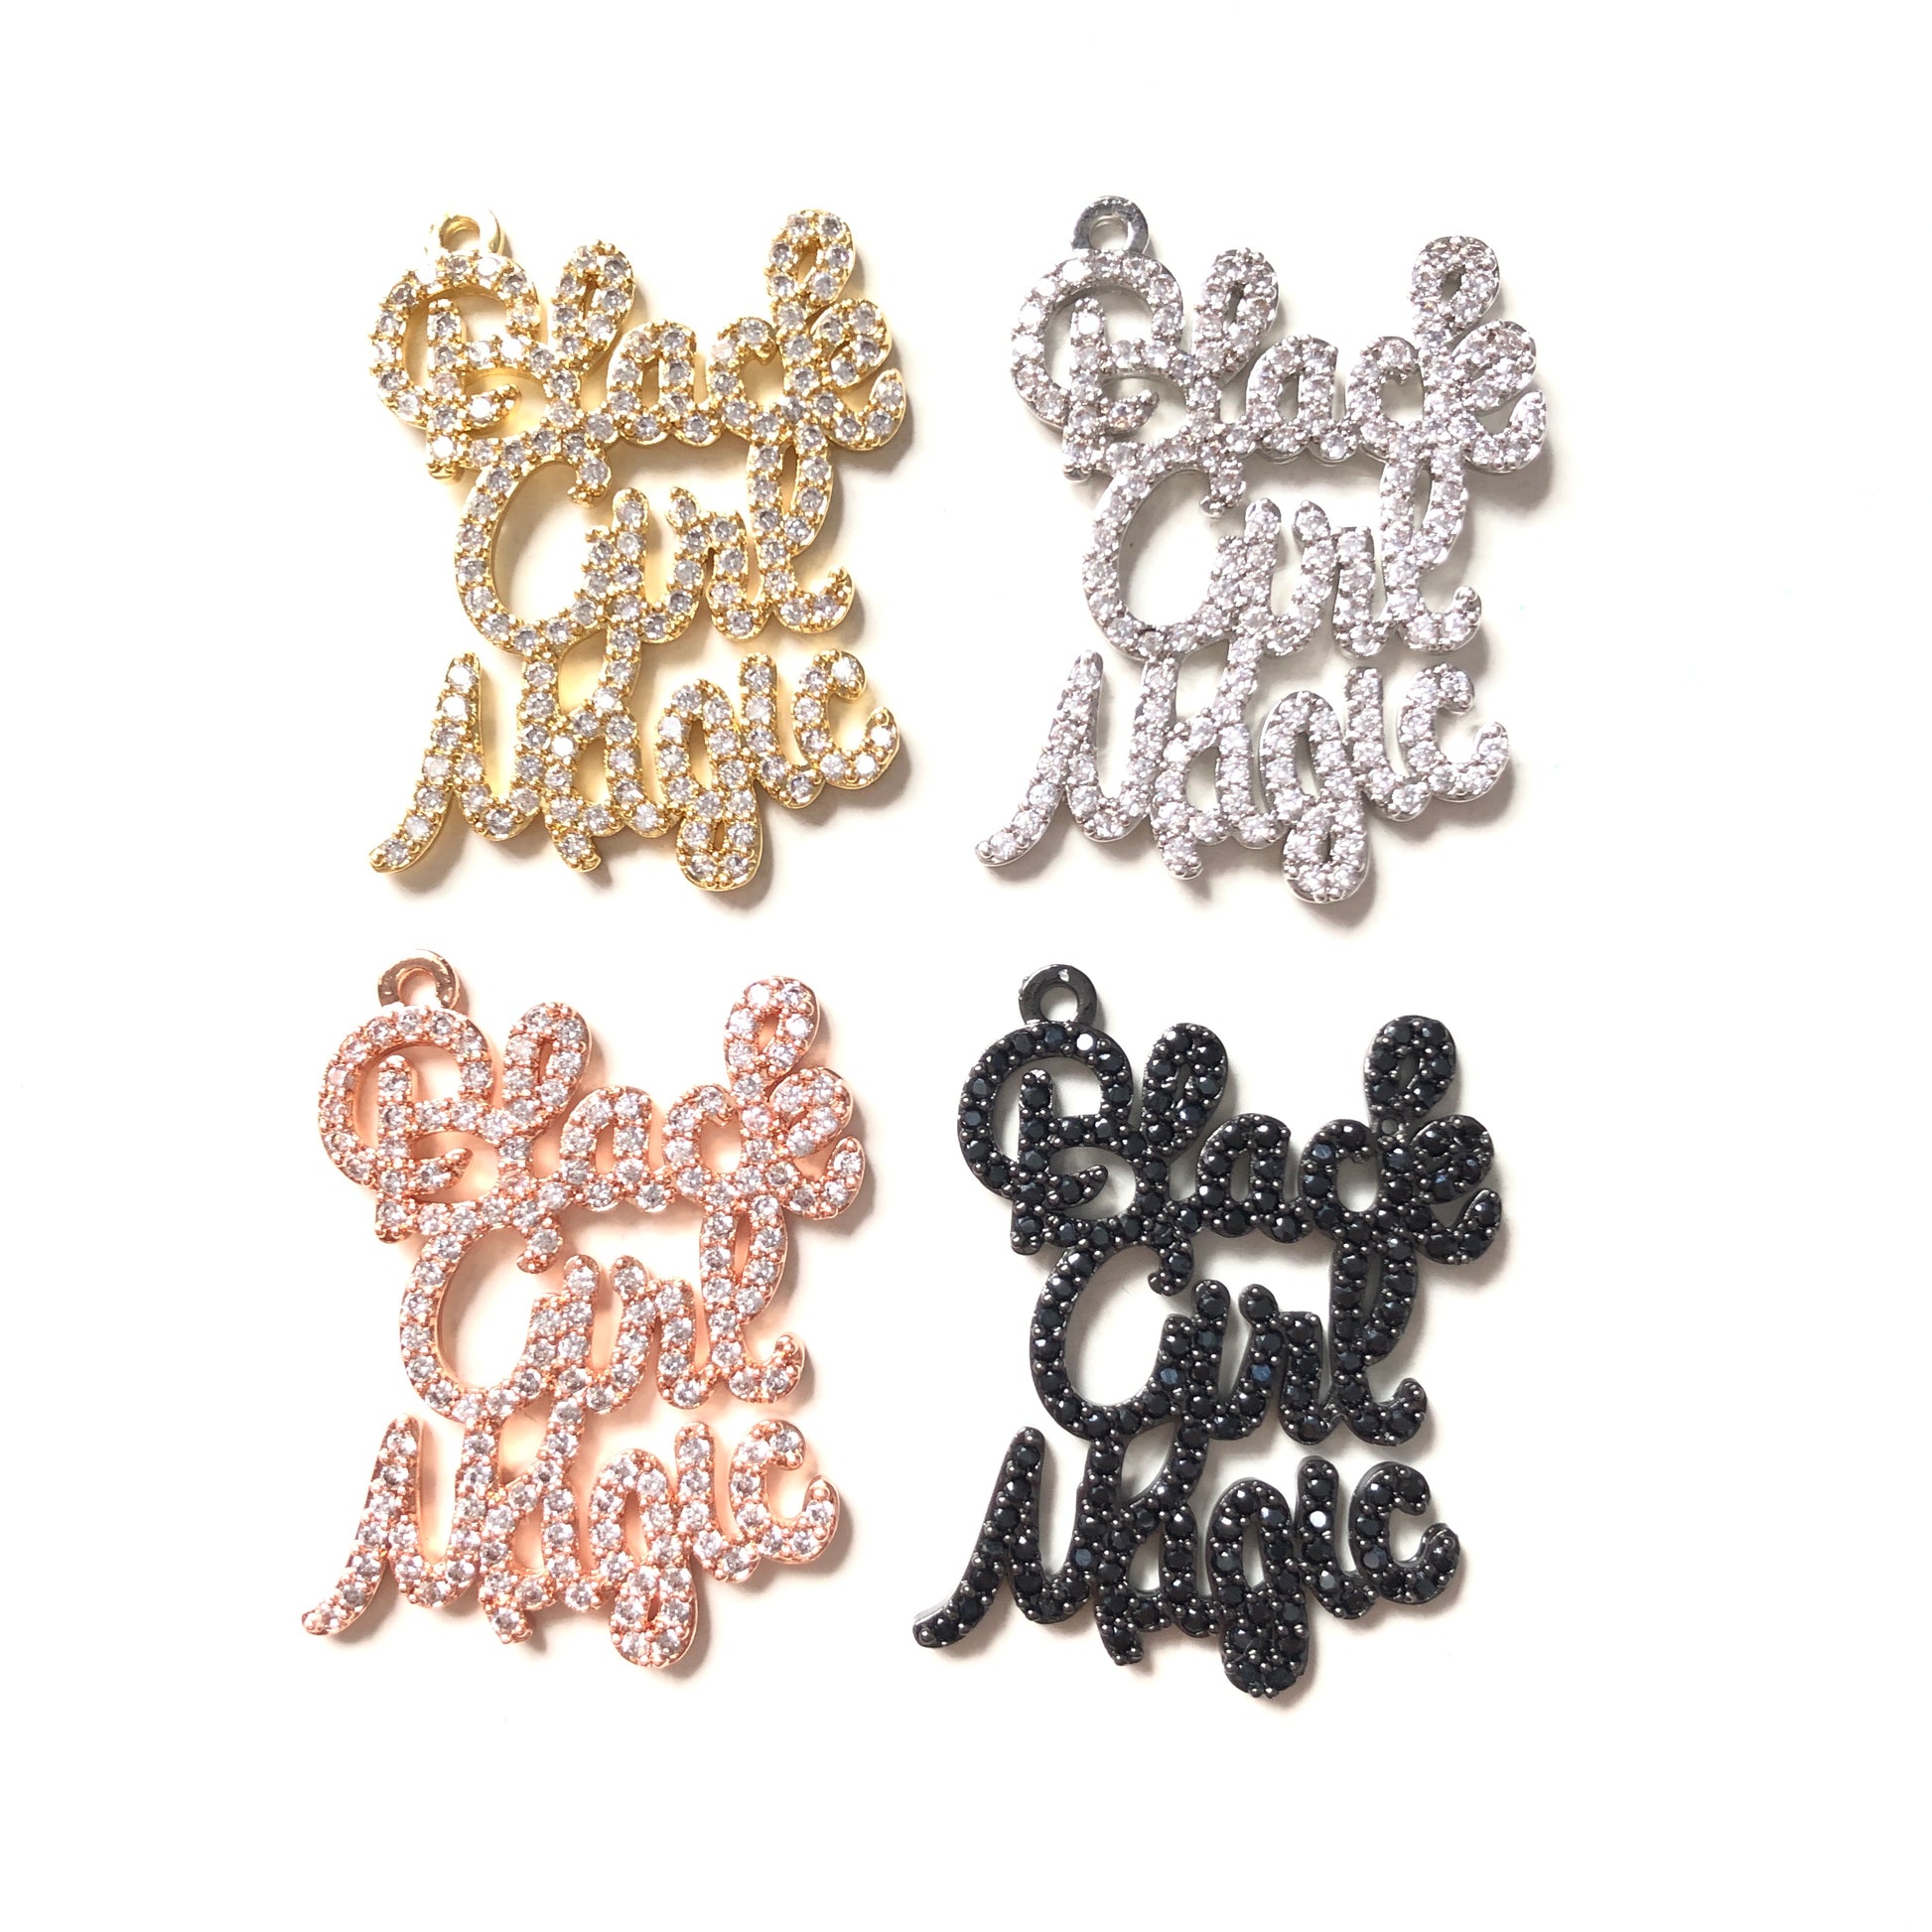 10pcs/lot 36*28mm CZ Paved Black Girl Magic Charms CZ Paved Charms Words & Quotes Charms Beads Beyond